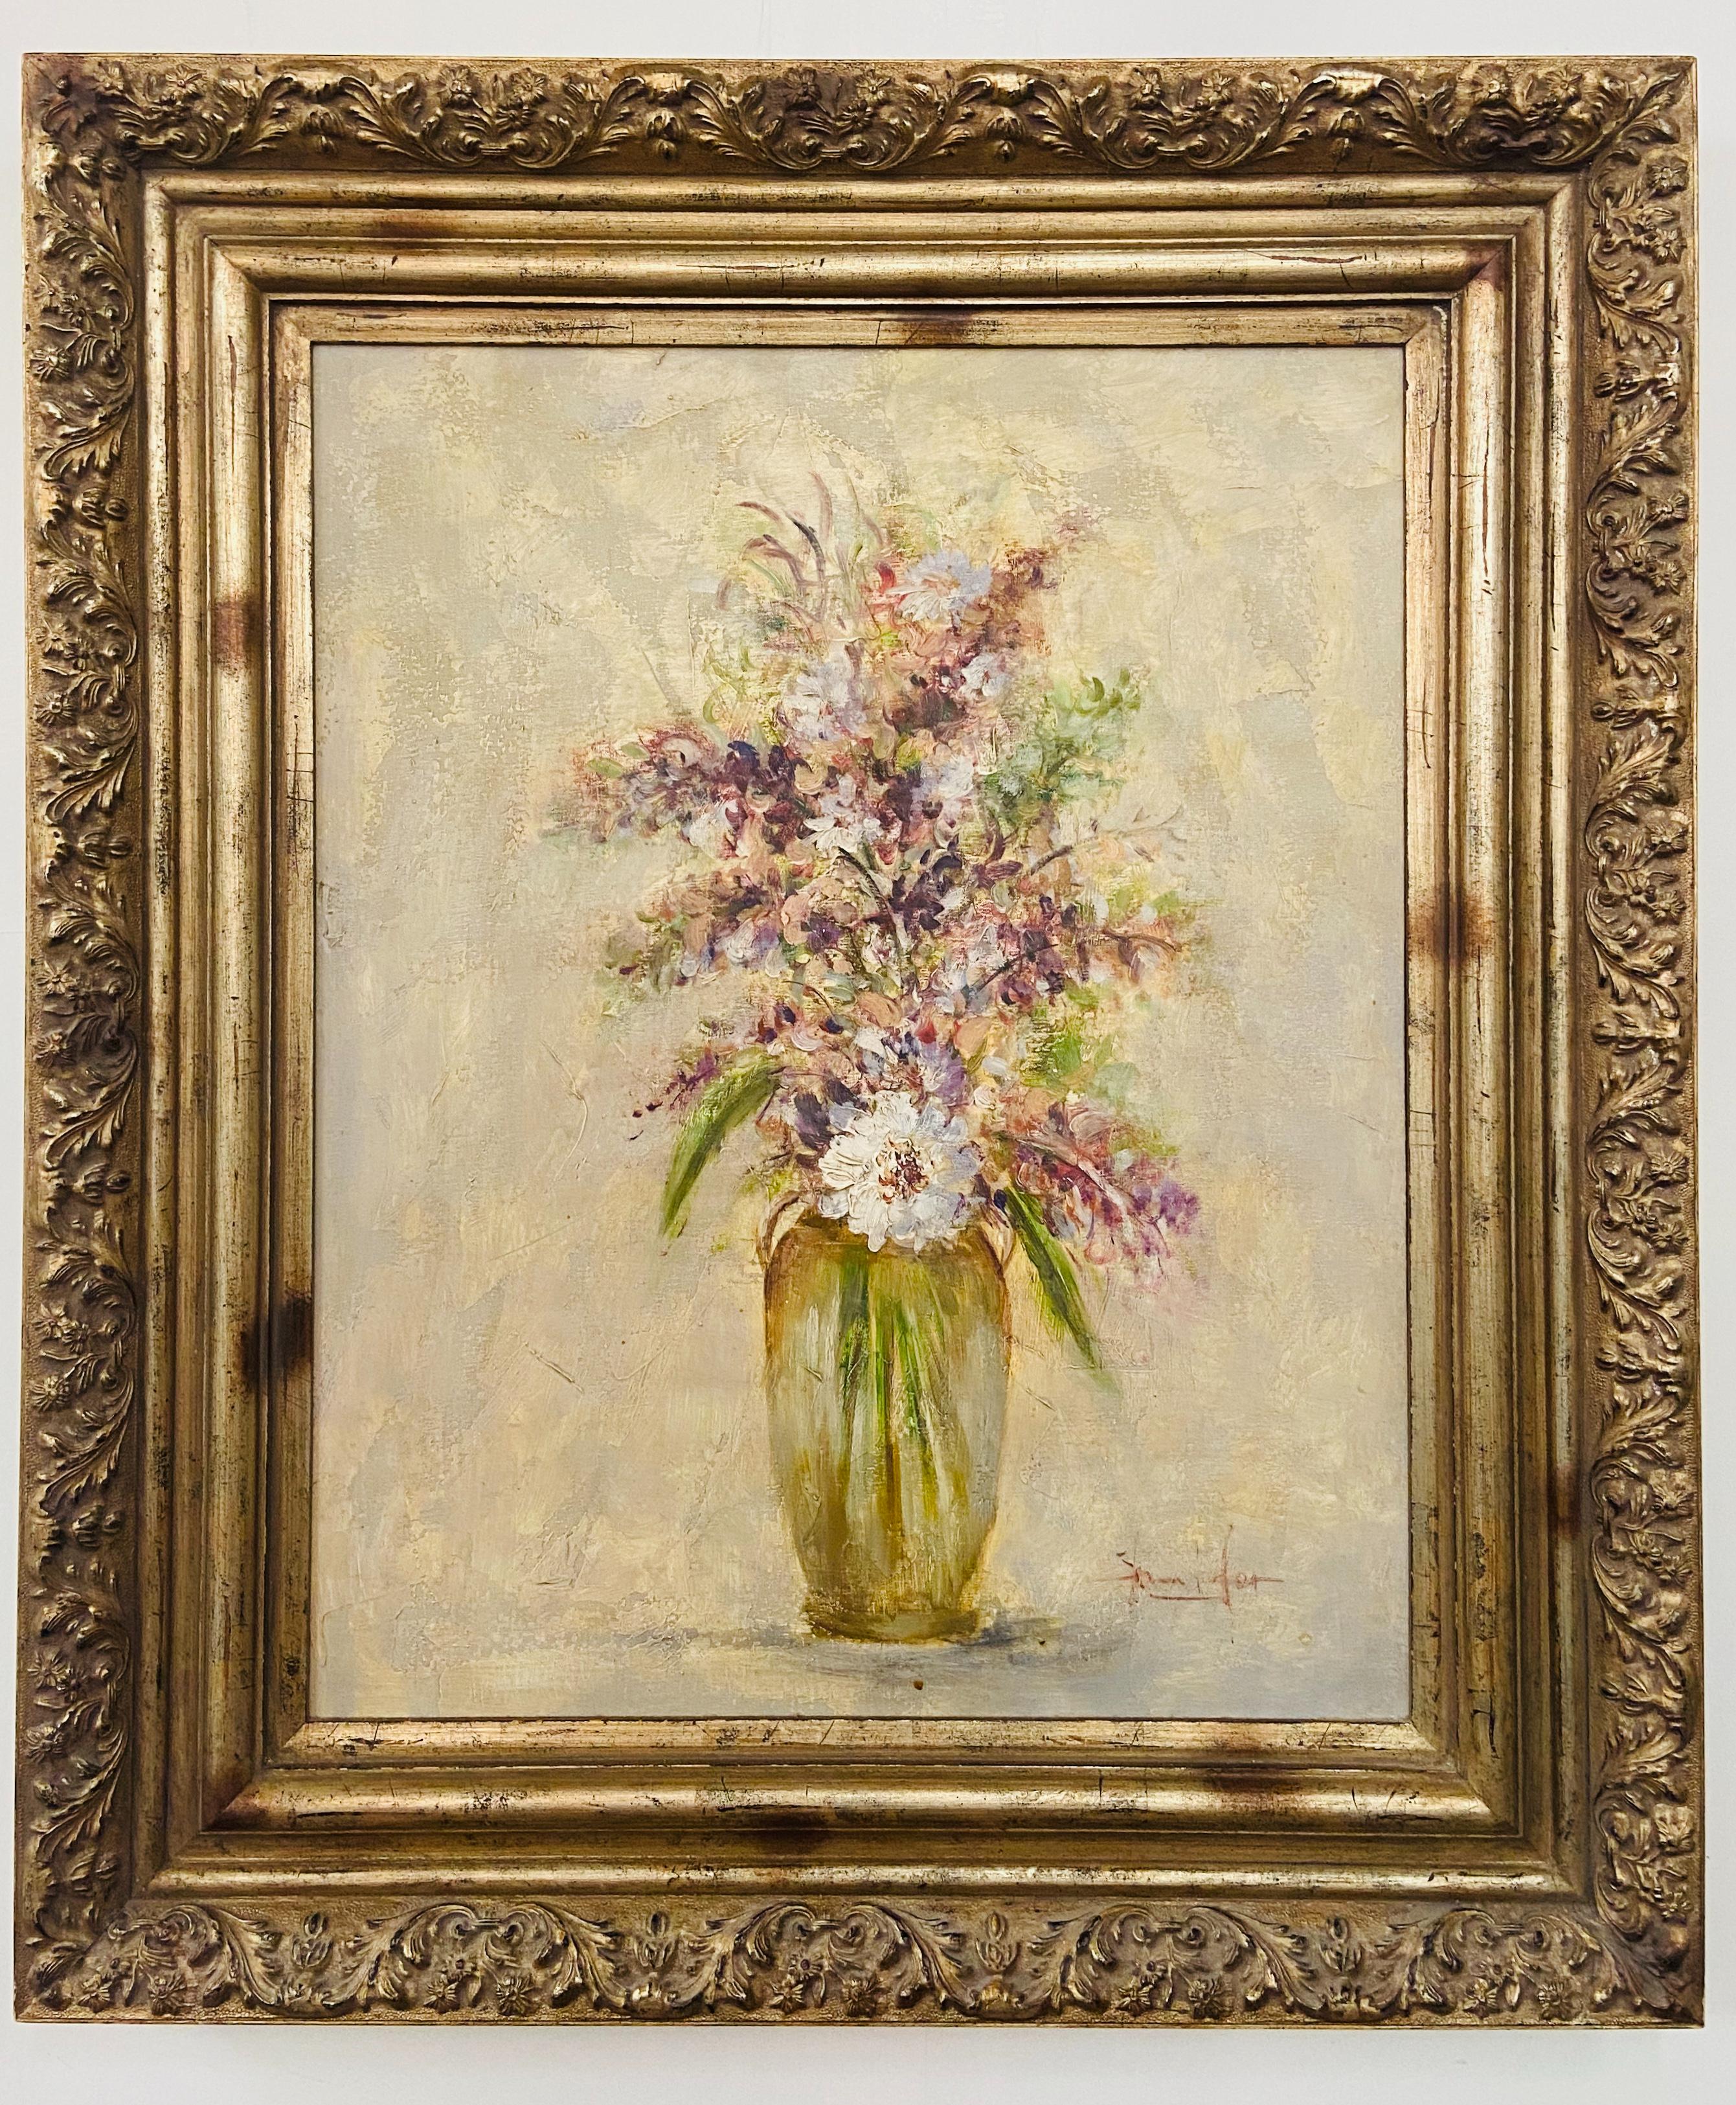 Oil on Canvas Still Life Painting of Flowers and Lavender Framed and Signed - Beige Still-Life Painting by Jennifer